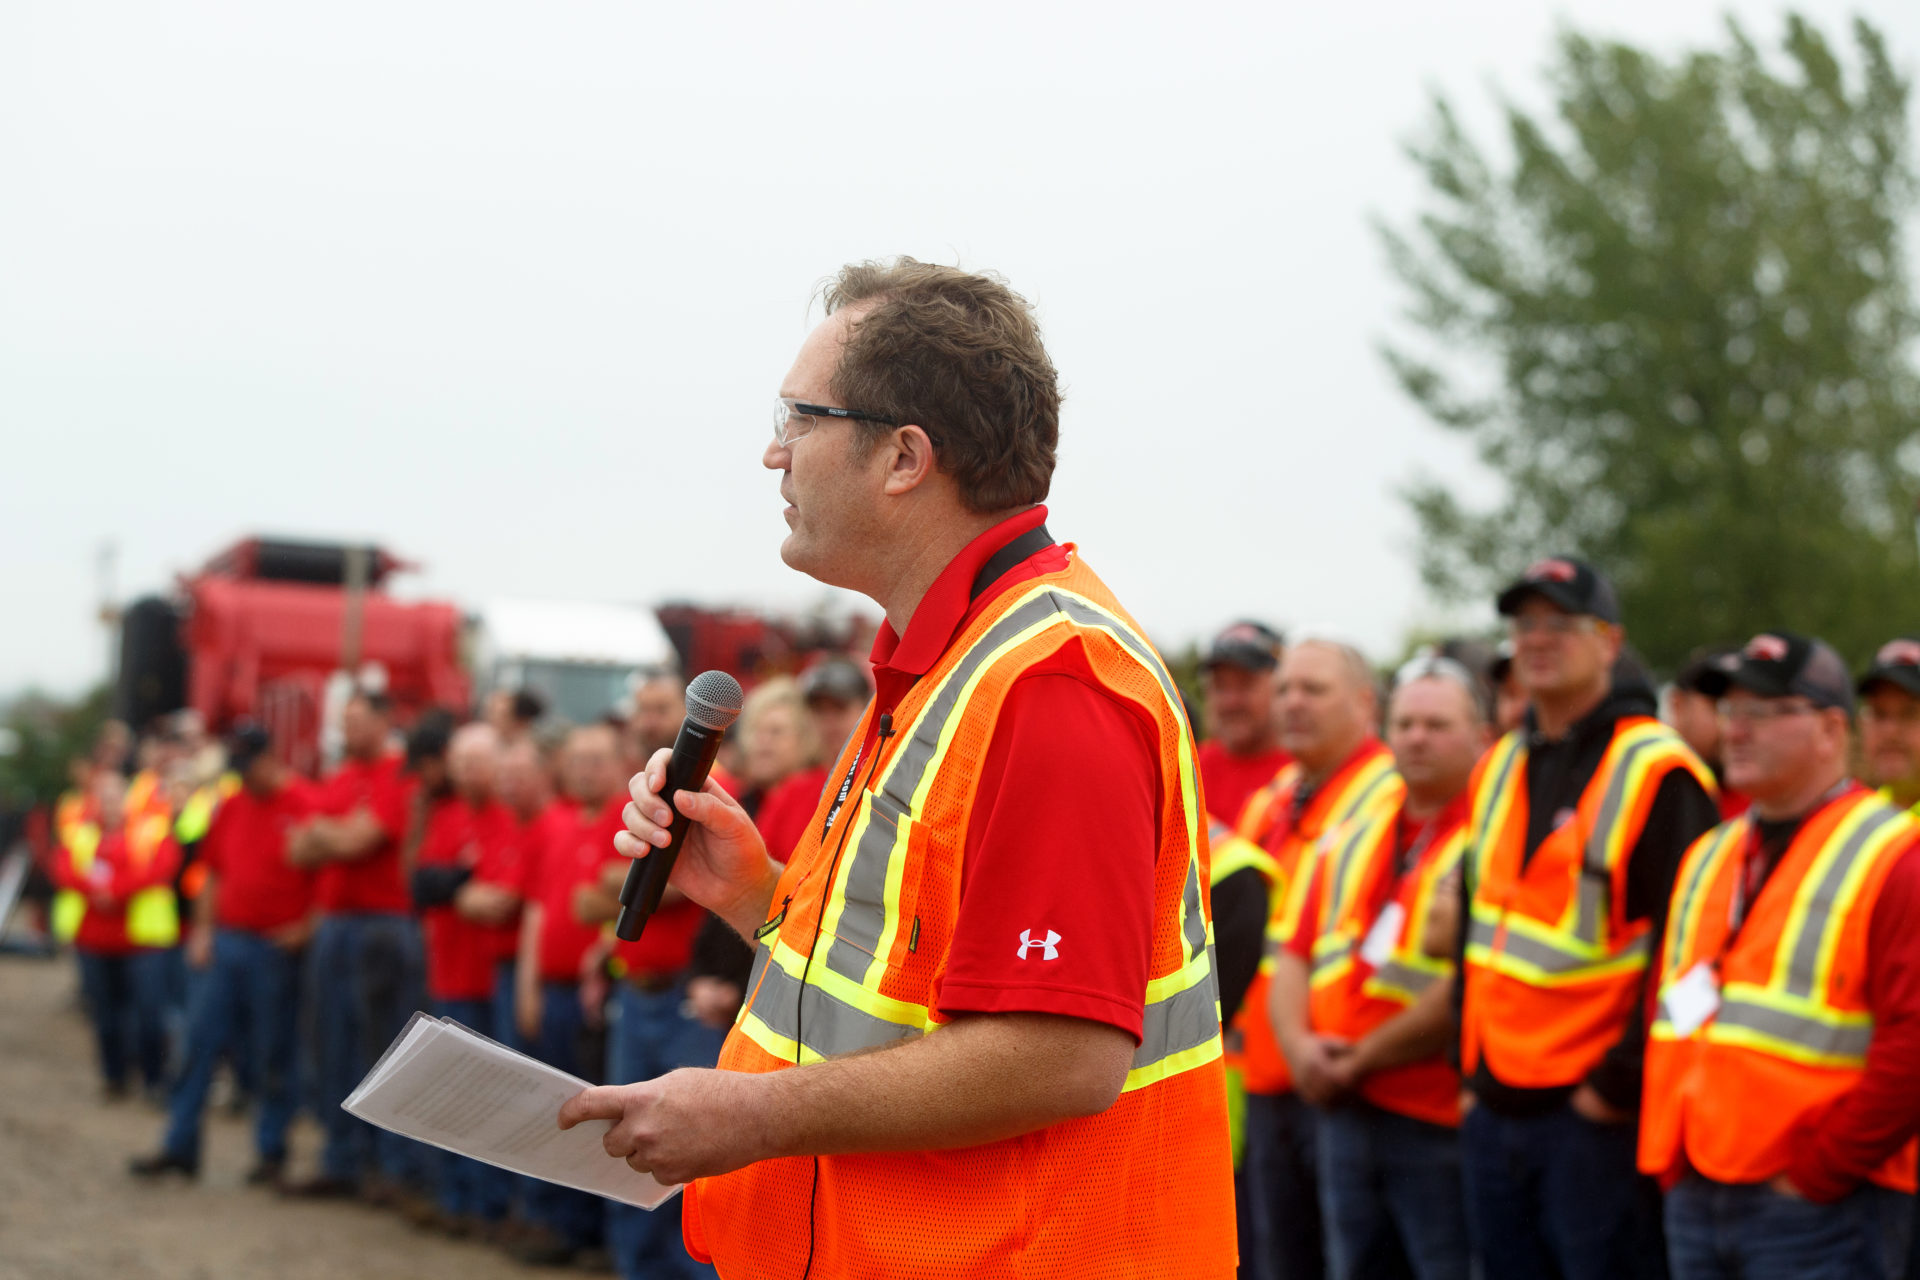 Rotochopper CEO with a microphone speaking to the crowd at the annual demo day event held by Rotochopper.